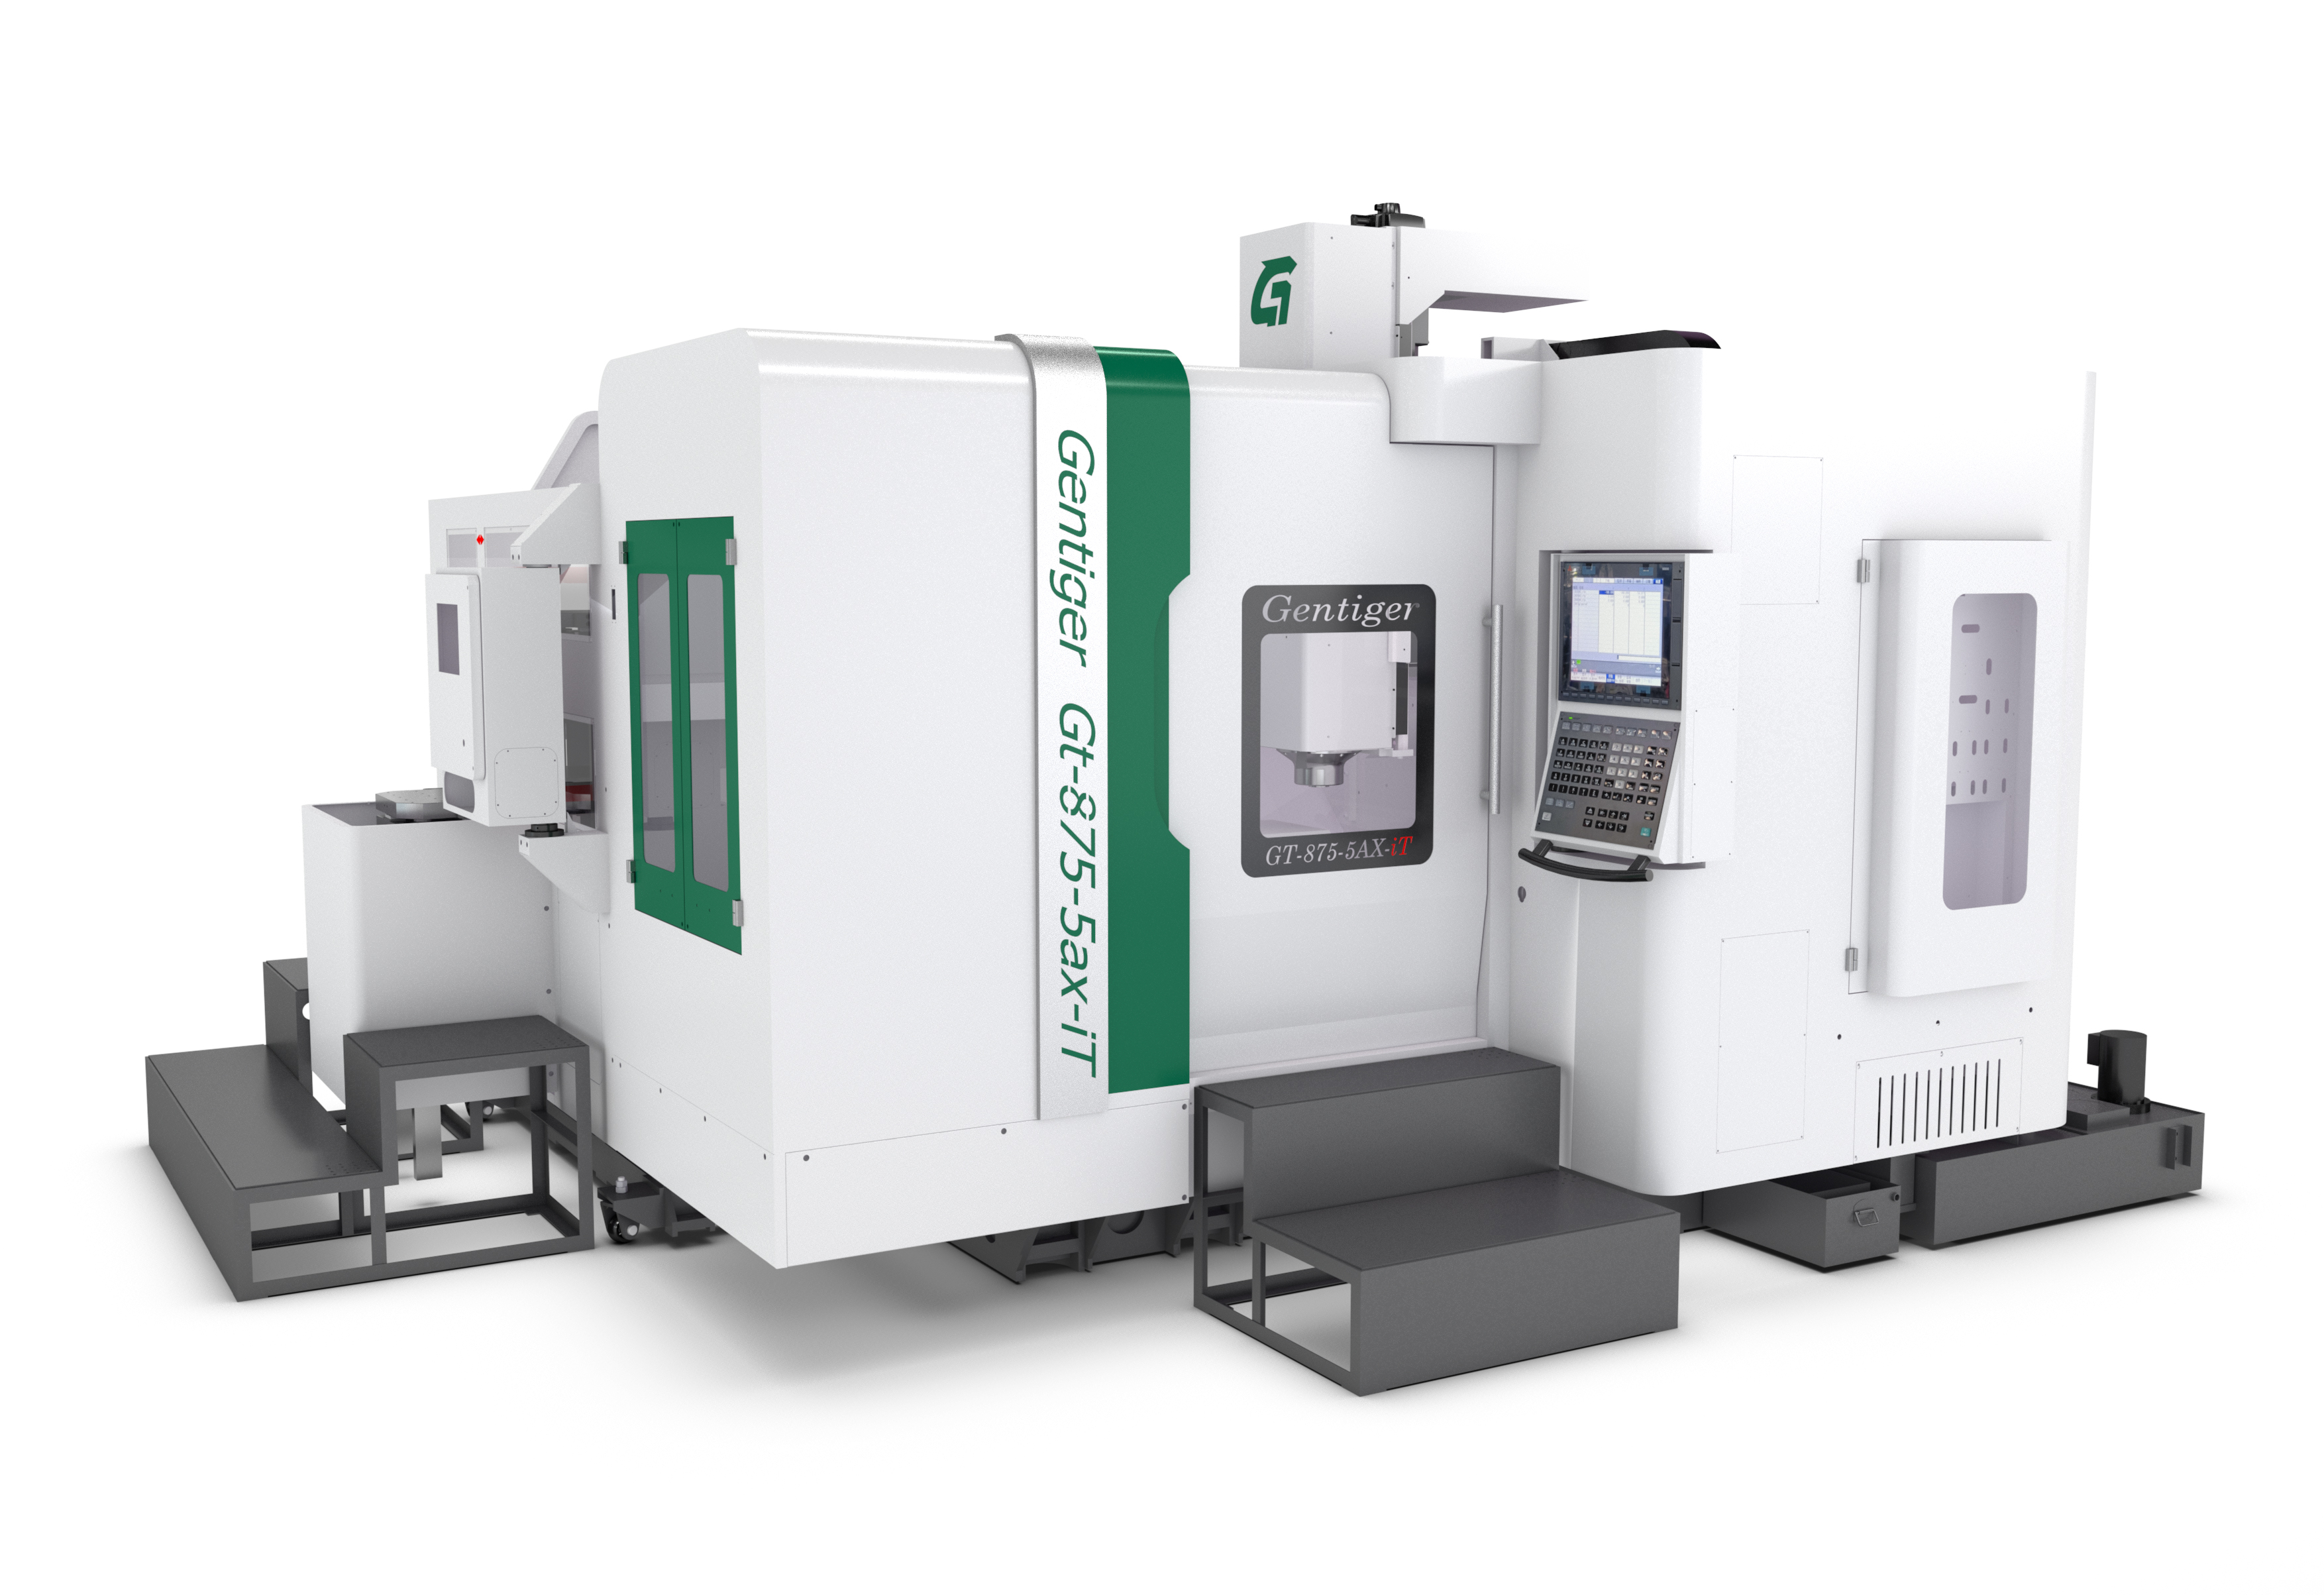 
                                Intelligent Integrated High Speed 5-axis Machining Center GT-875-5AX-iT
                            